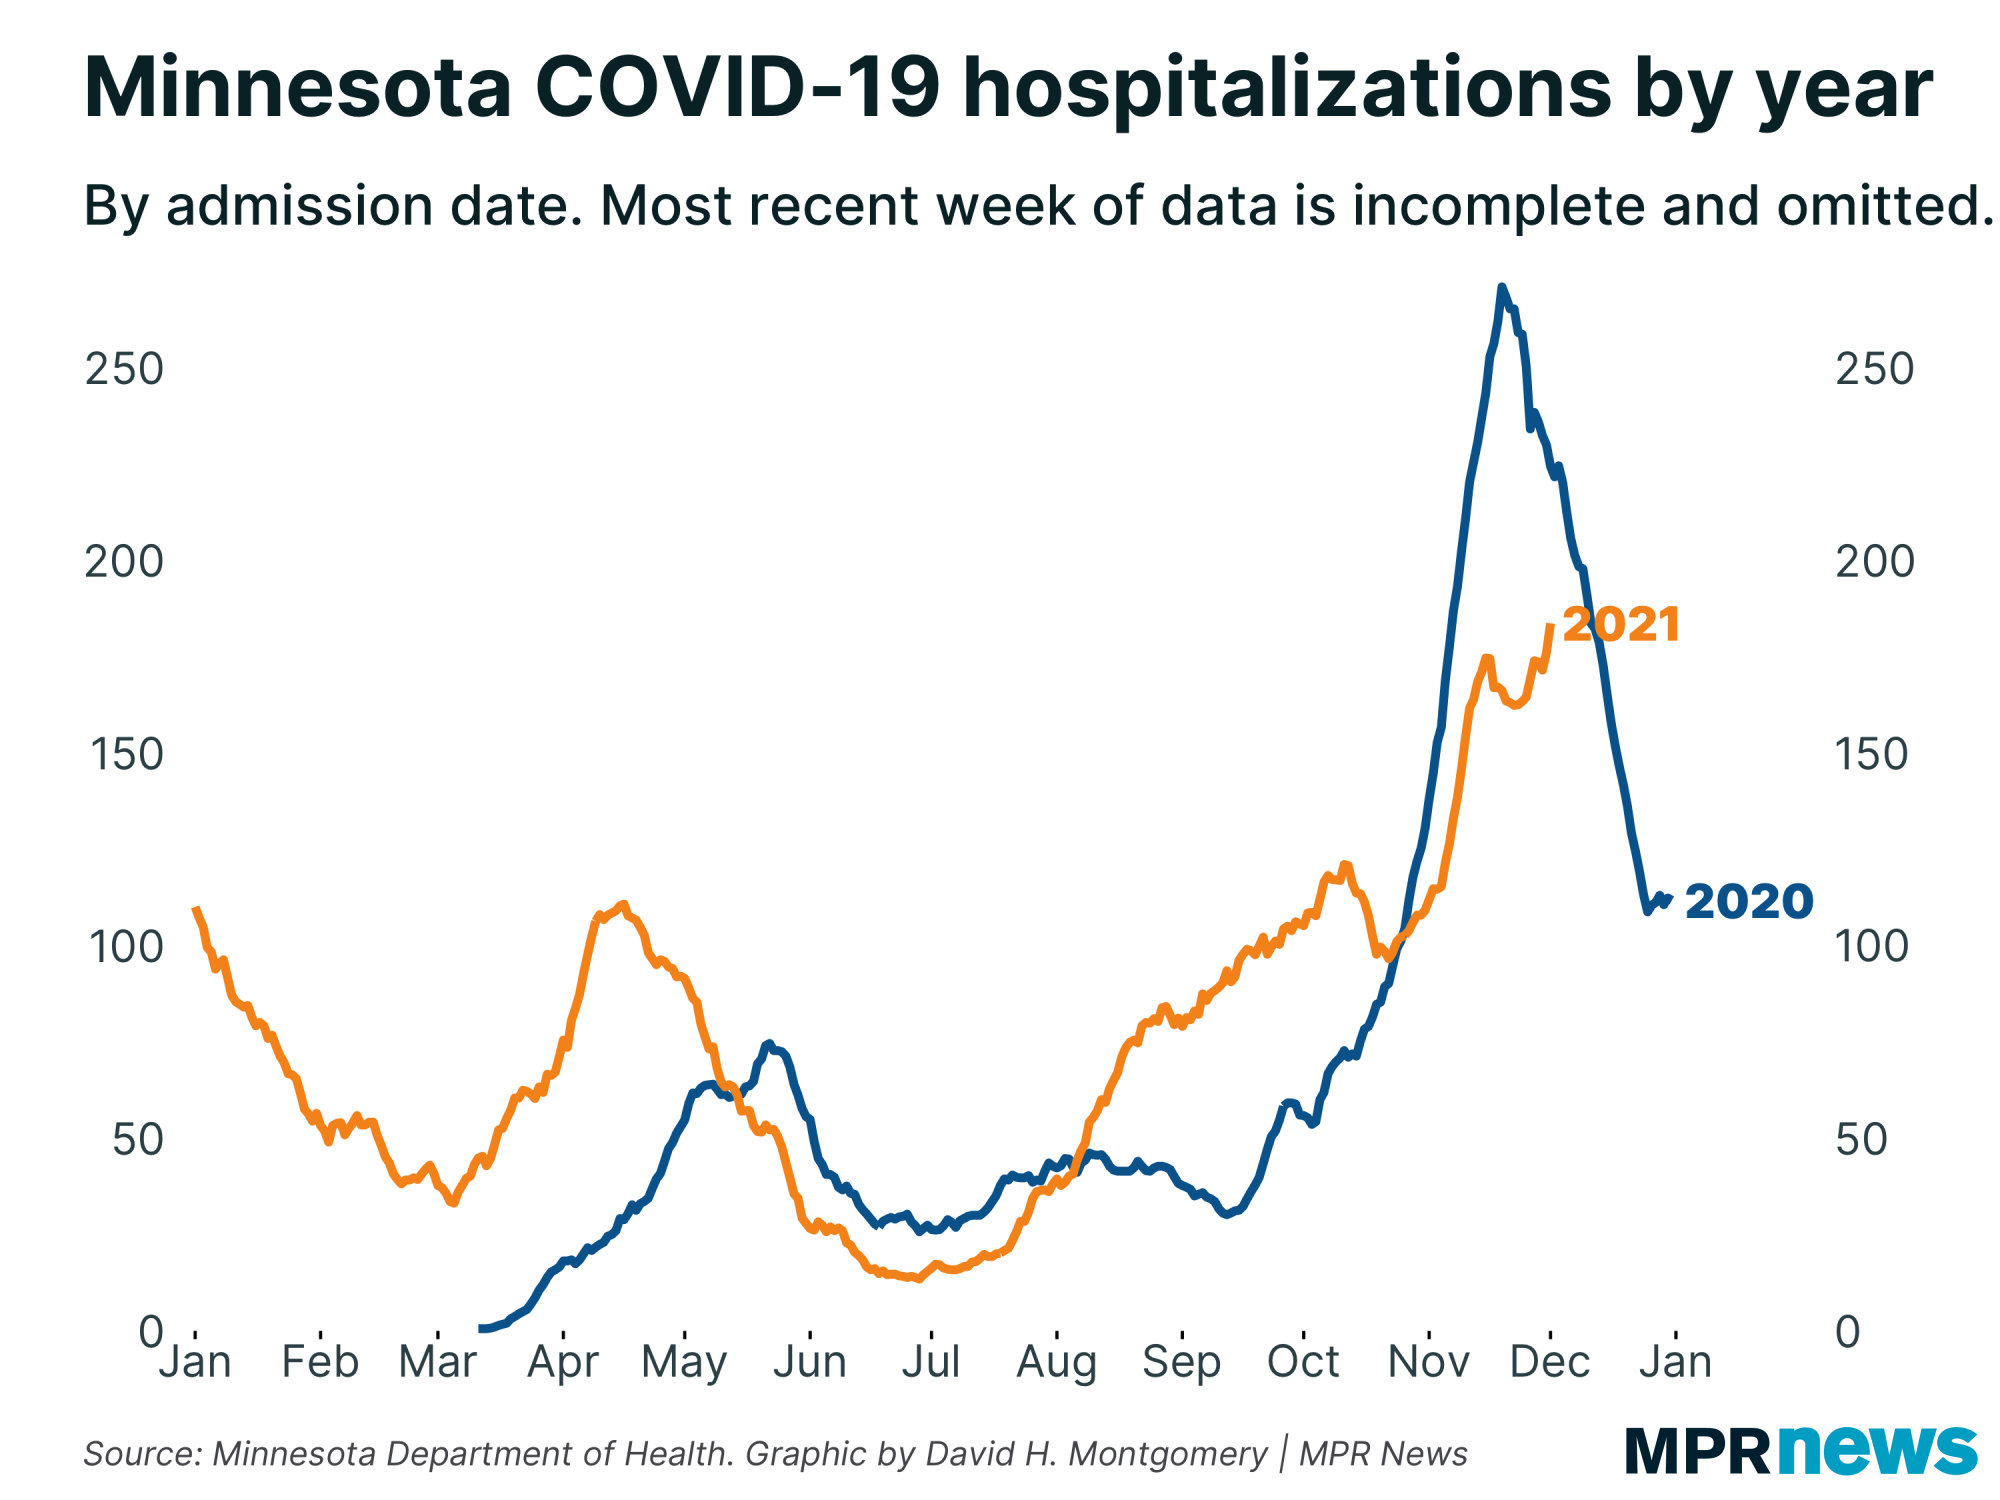 Graph of Minnesota's COVID-19 hospitalizations by year